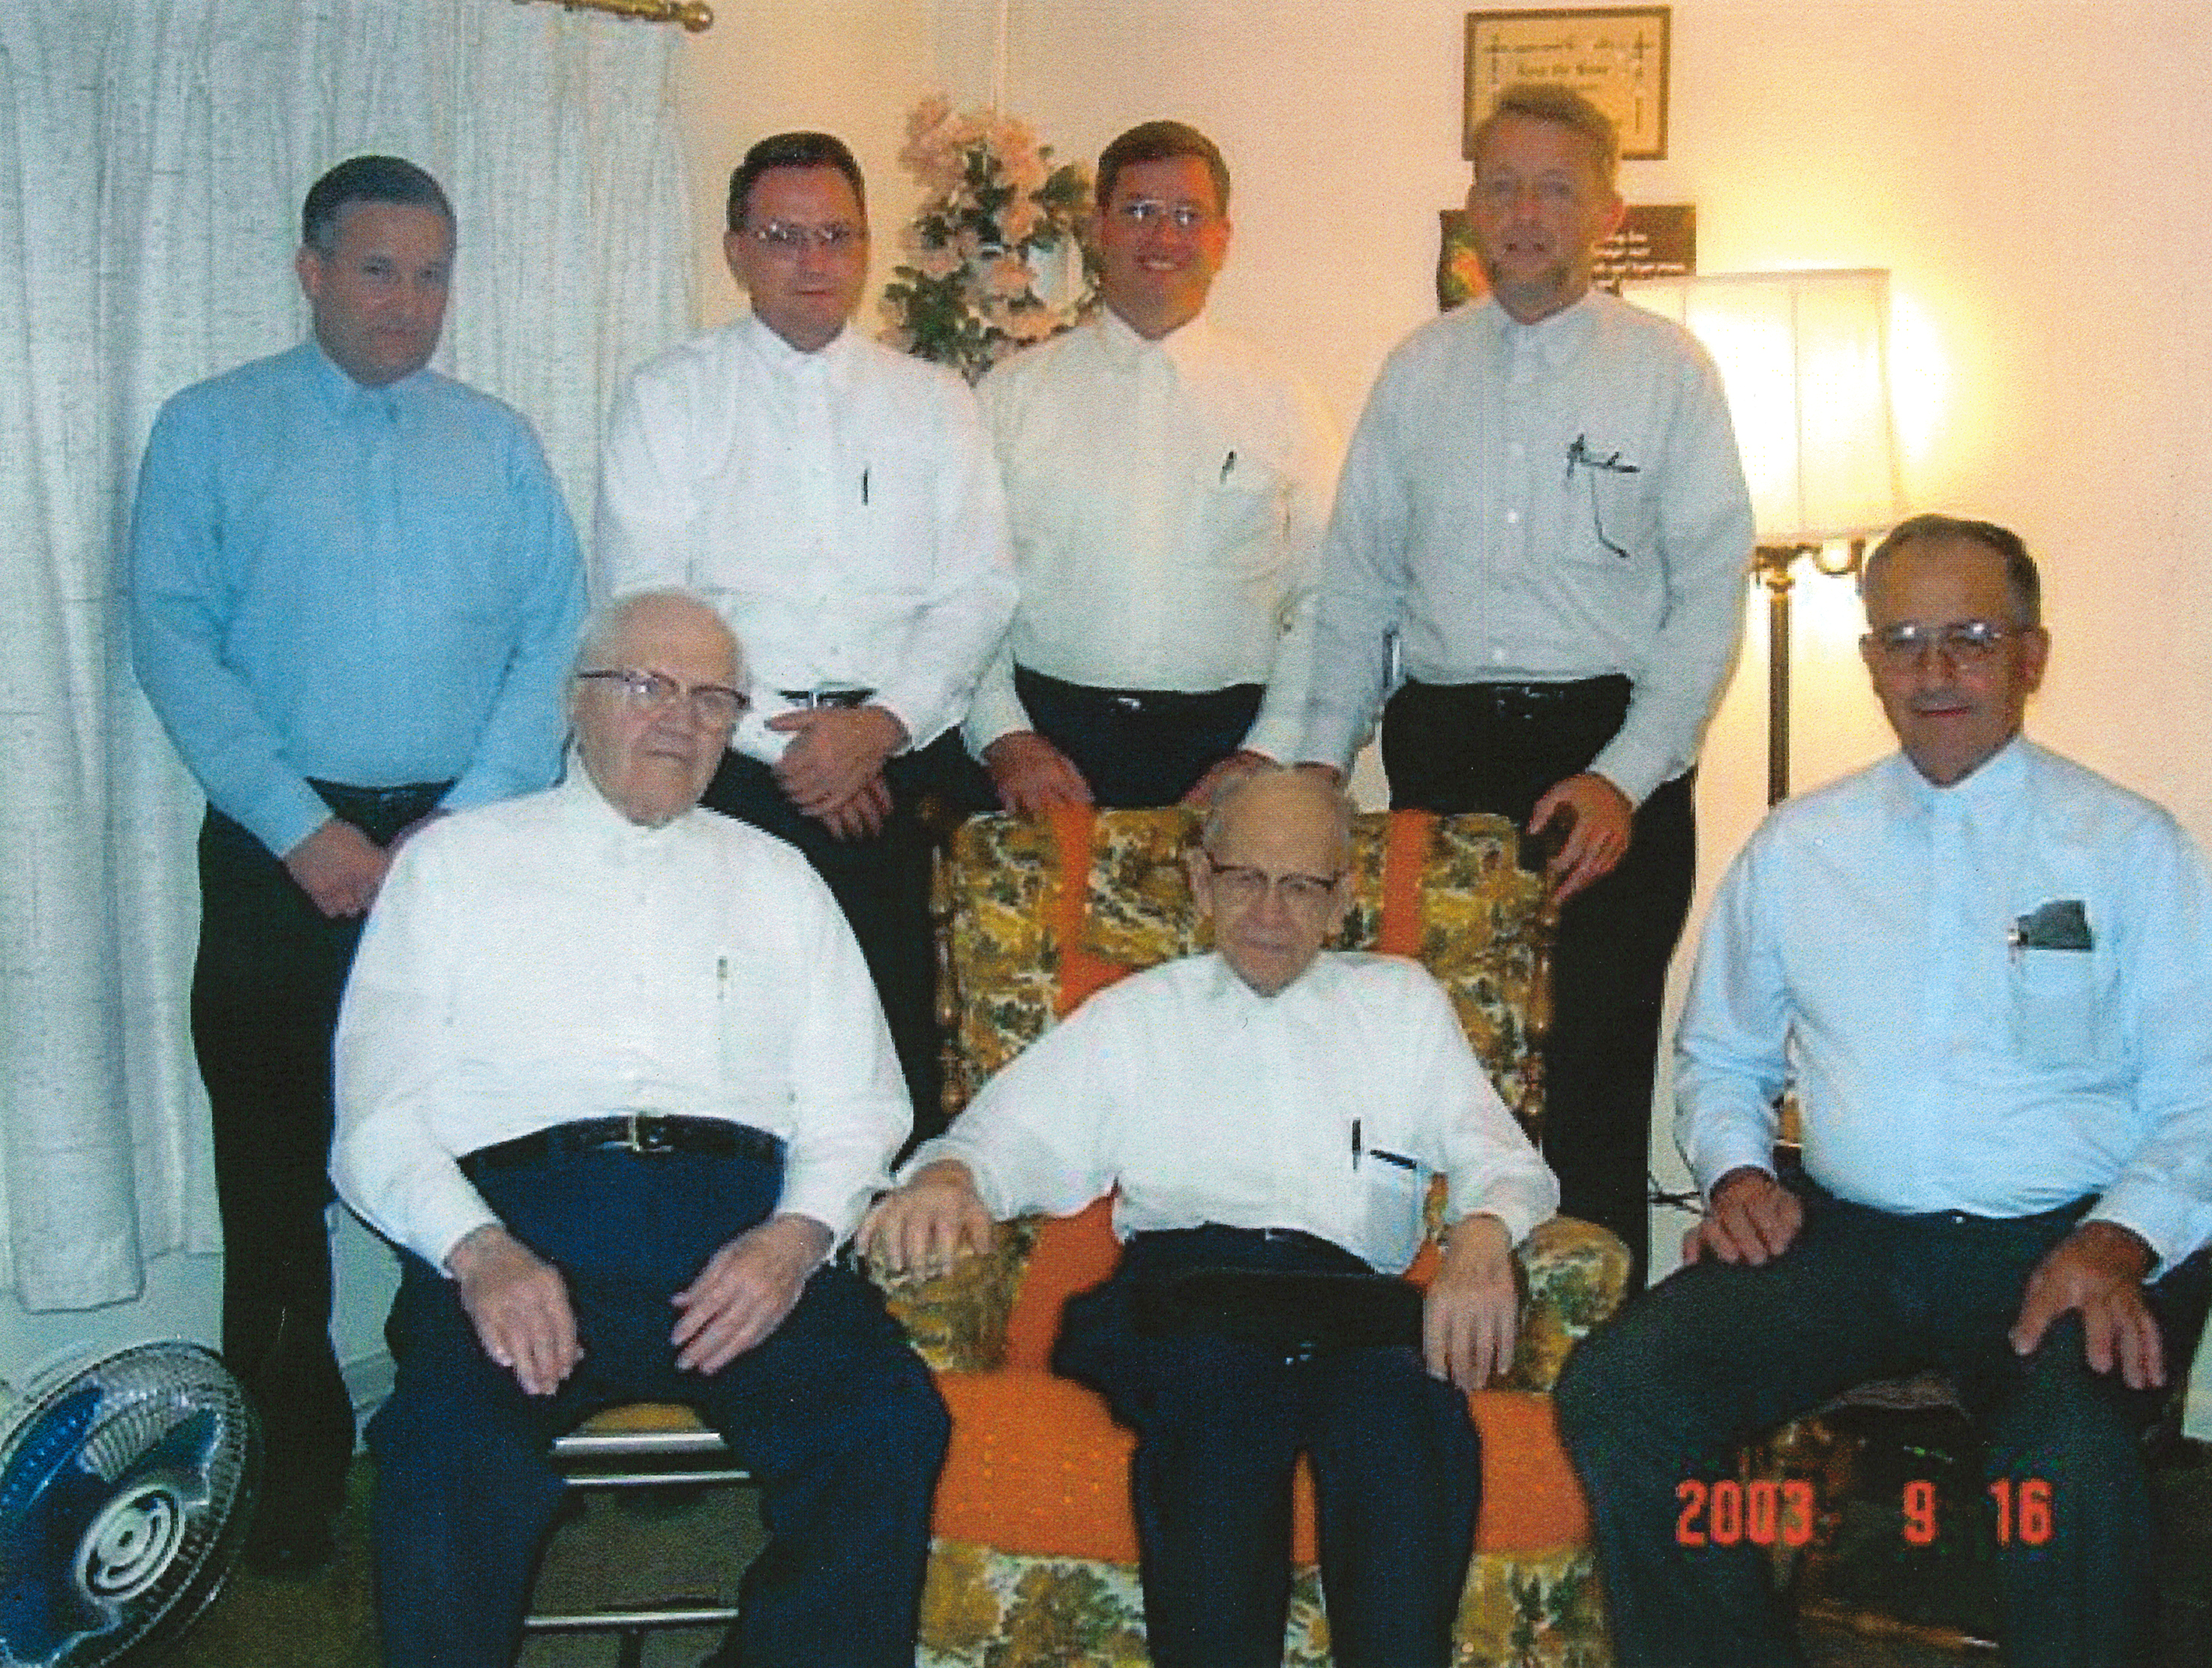 9/16/2003 PMC Bishop group. Front row. L to R Sidney Gingerich, Aaron Shank. and Harry Neuenschwander. Back row Earl Ray Hursh, Ivan Martin Jr, H. Stephen Ebersole and Simon R. Yoder